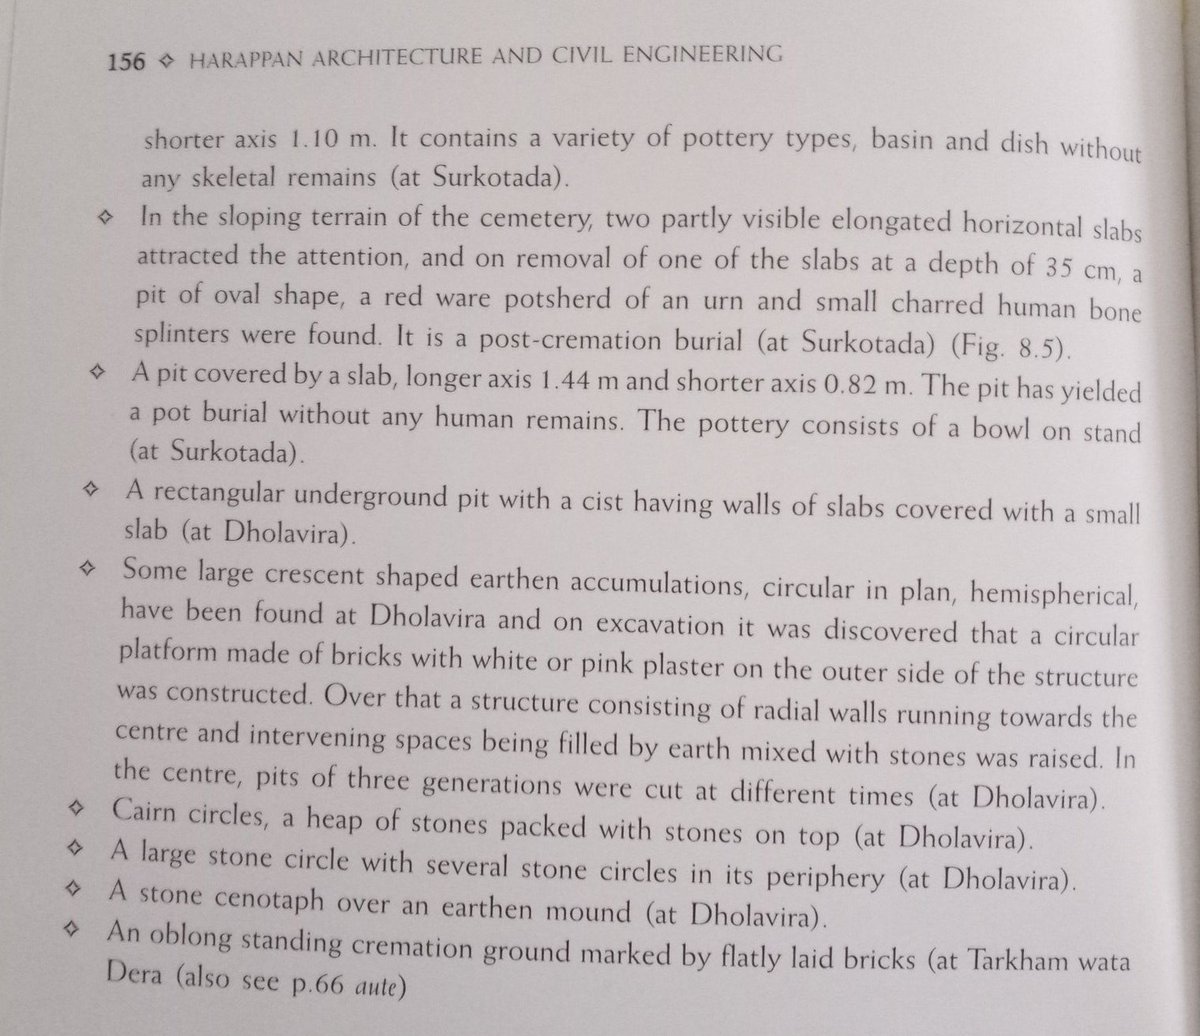 The burials at Dholavira with stones and slabs also reminds us of later megalithic burials reported all over India, as noted by excavator RS Bisht.